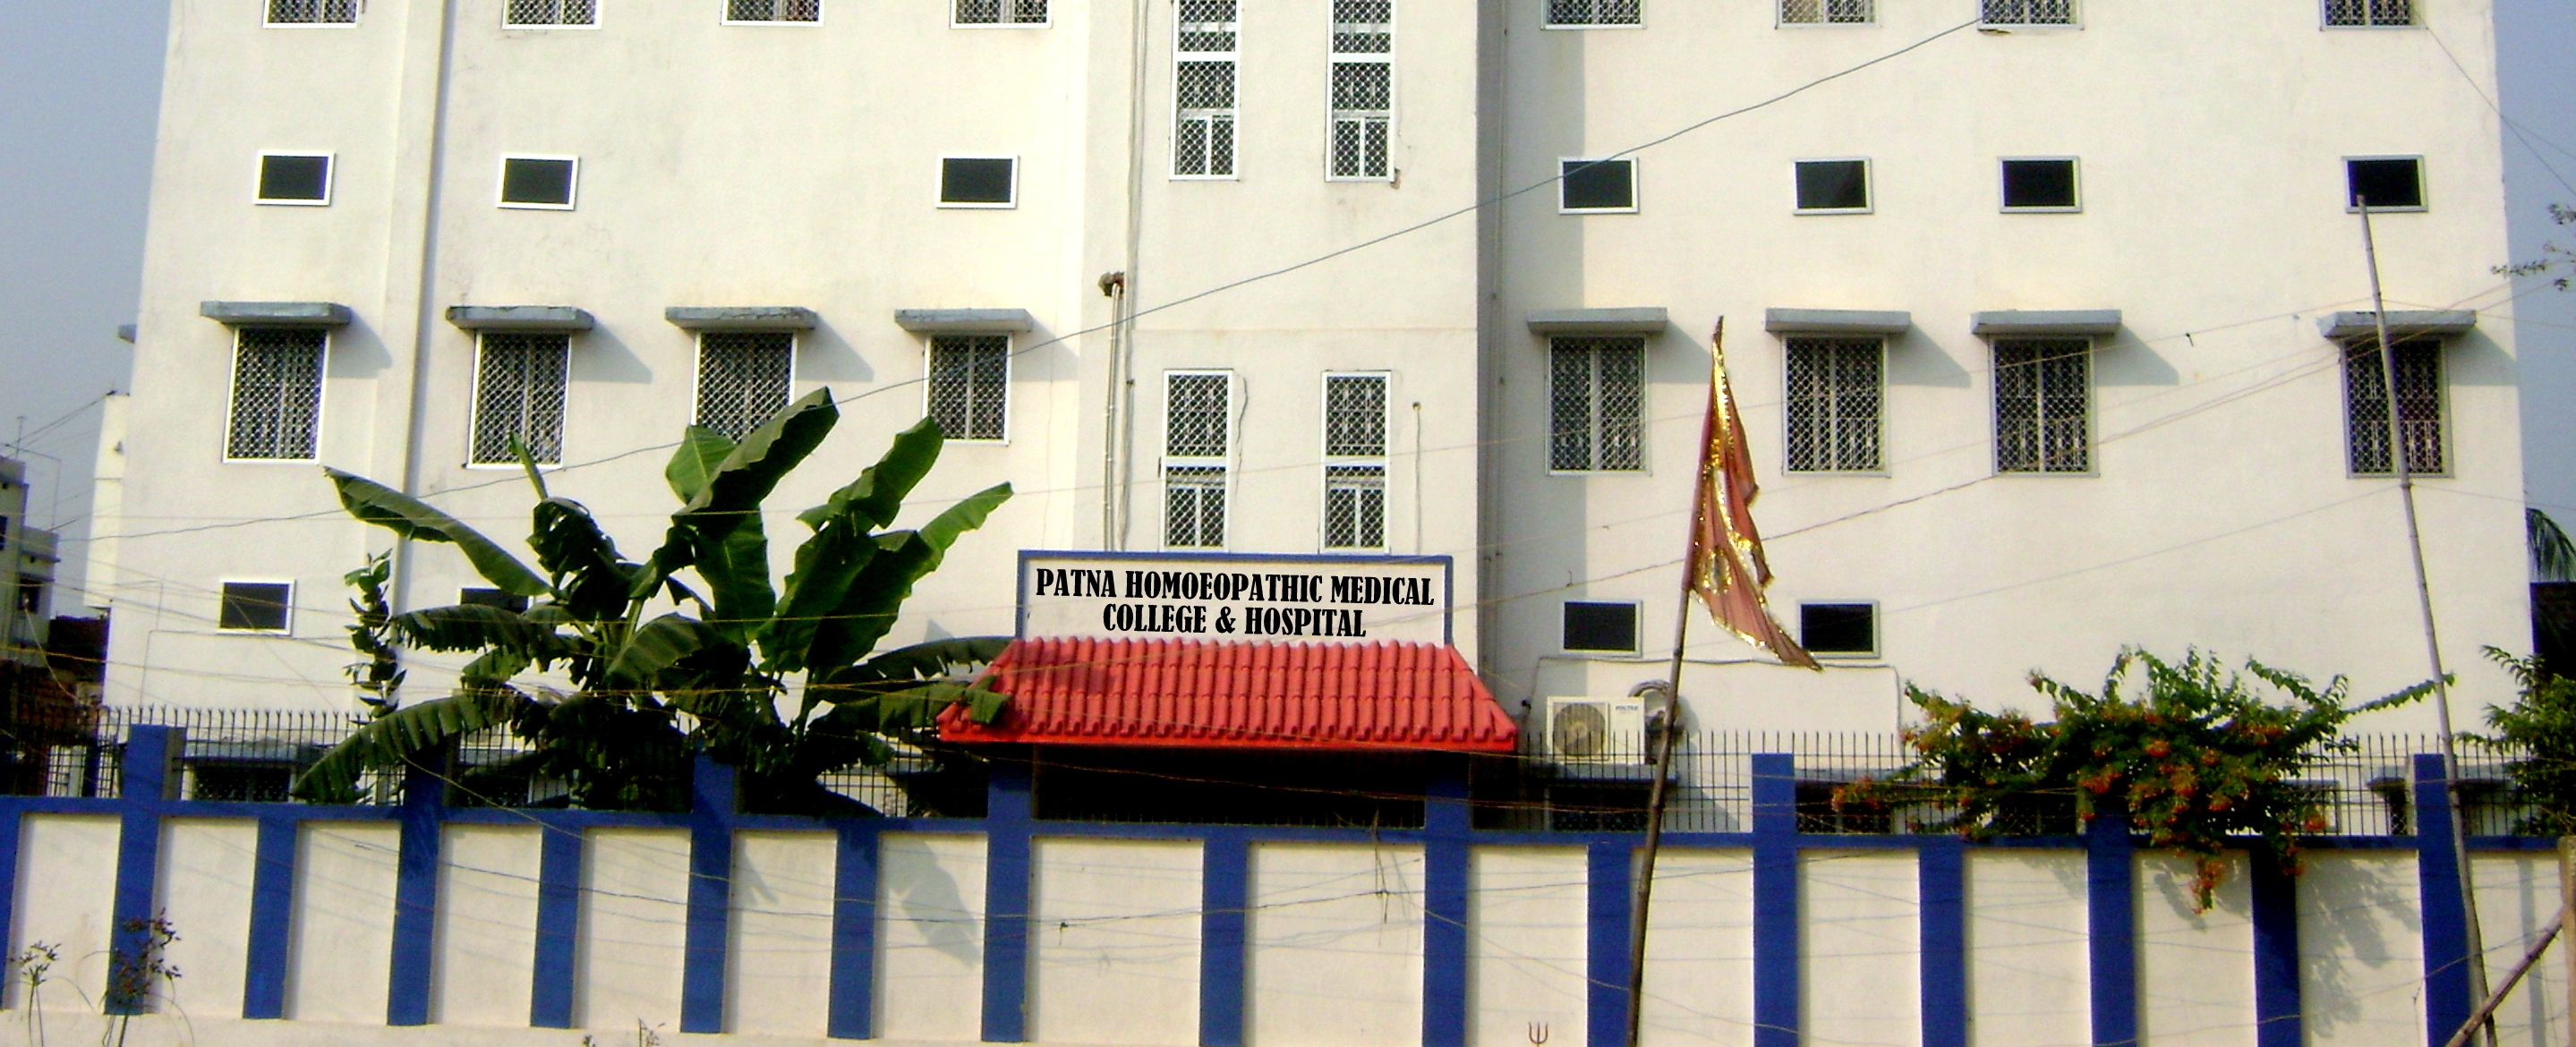 Patna Homoeopathic Medical College and Hospital Image